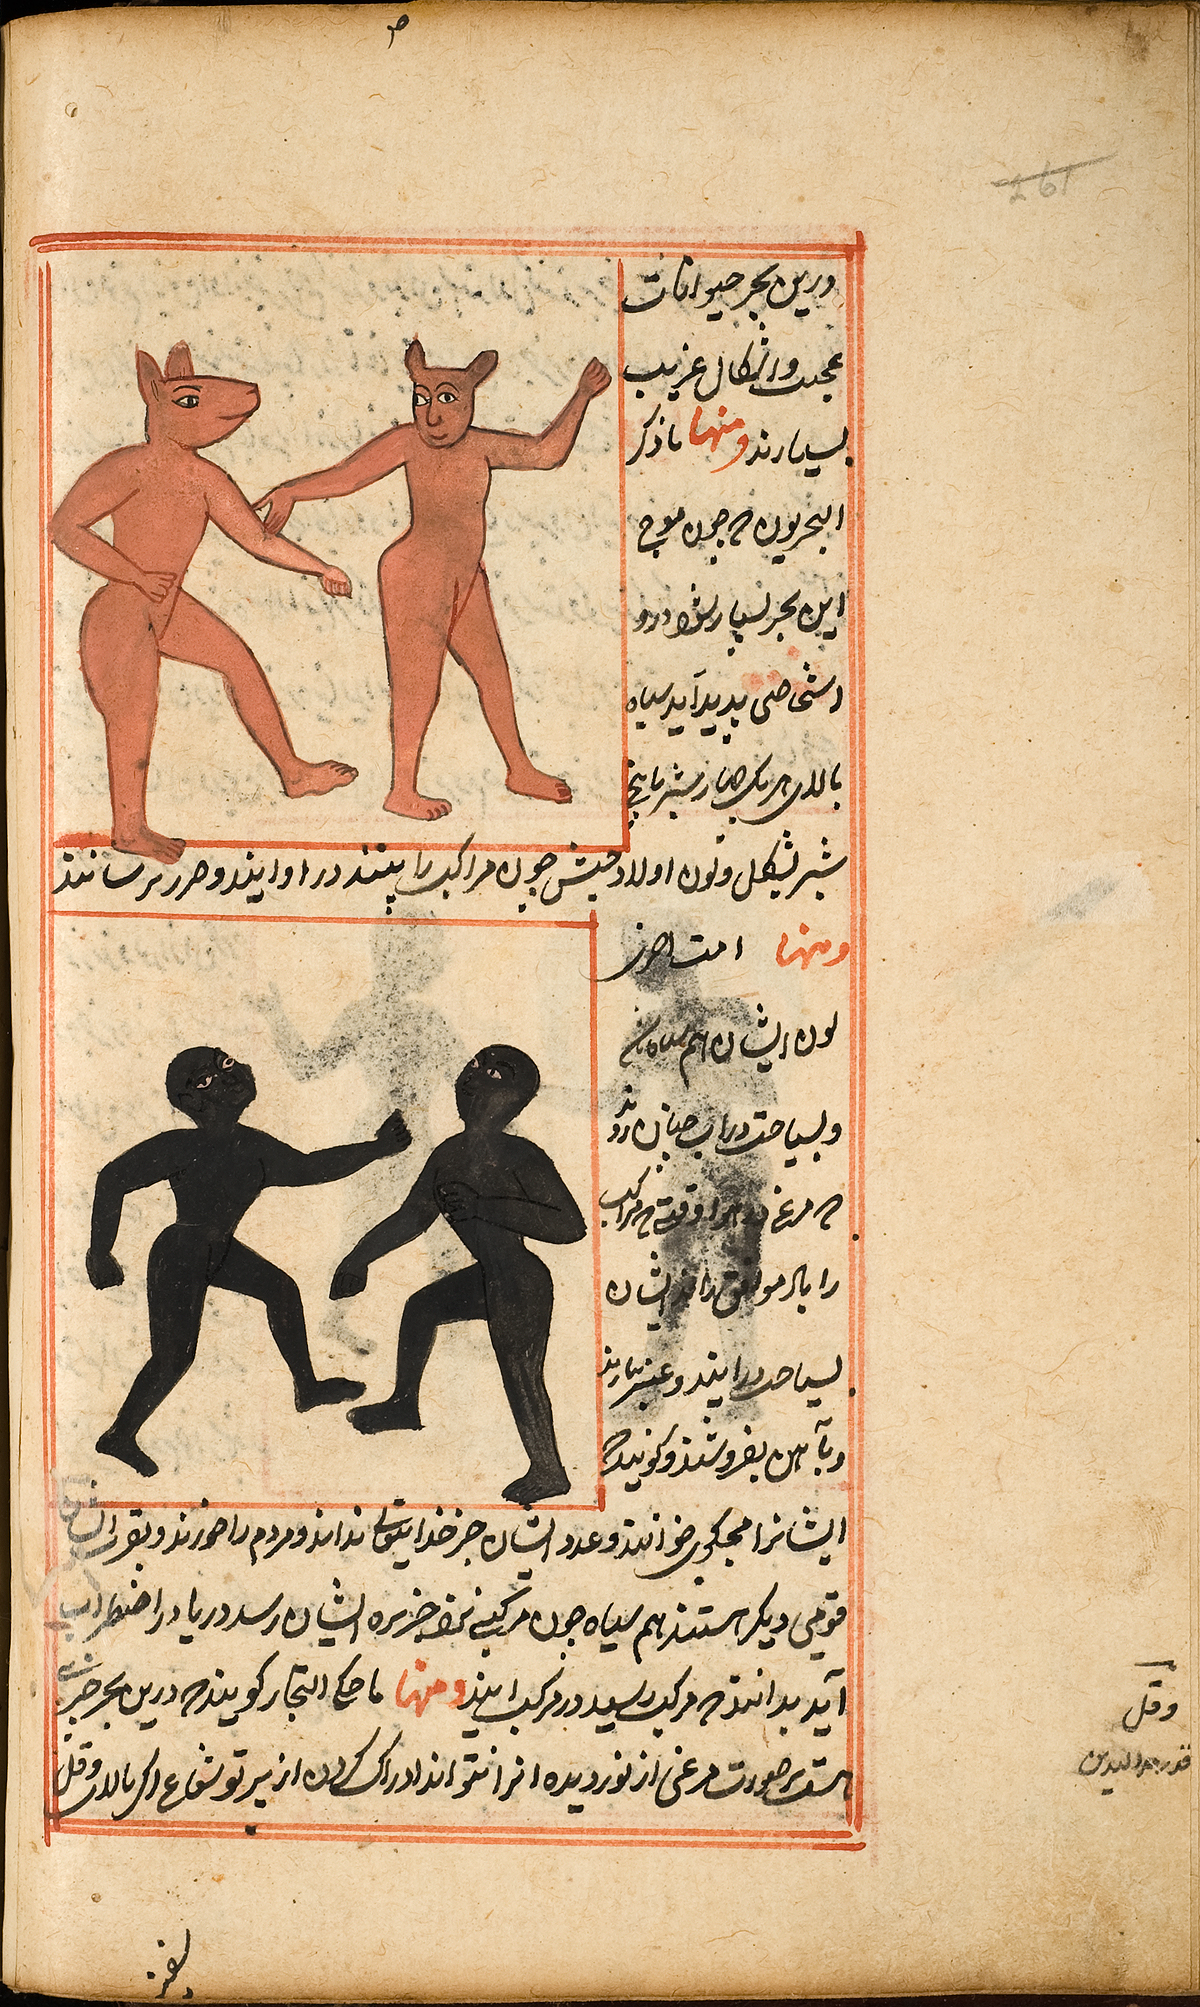 Four humanoids from the island of Zaneh; at the top of the page are two colored pink standing upright with animal heads resembling deer; at the bottom are two colored black standing upright with human heads but without mouths; all the images surrounded by Persian text and a red double ruled border.